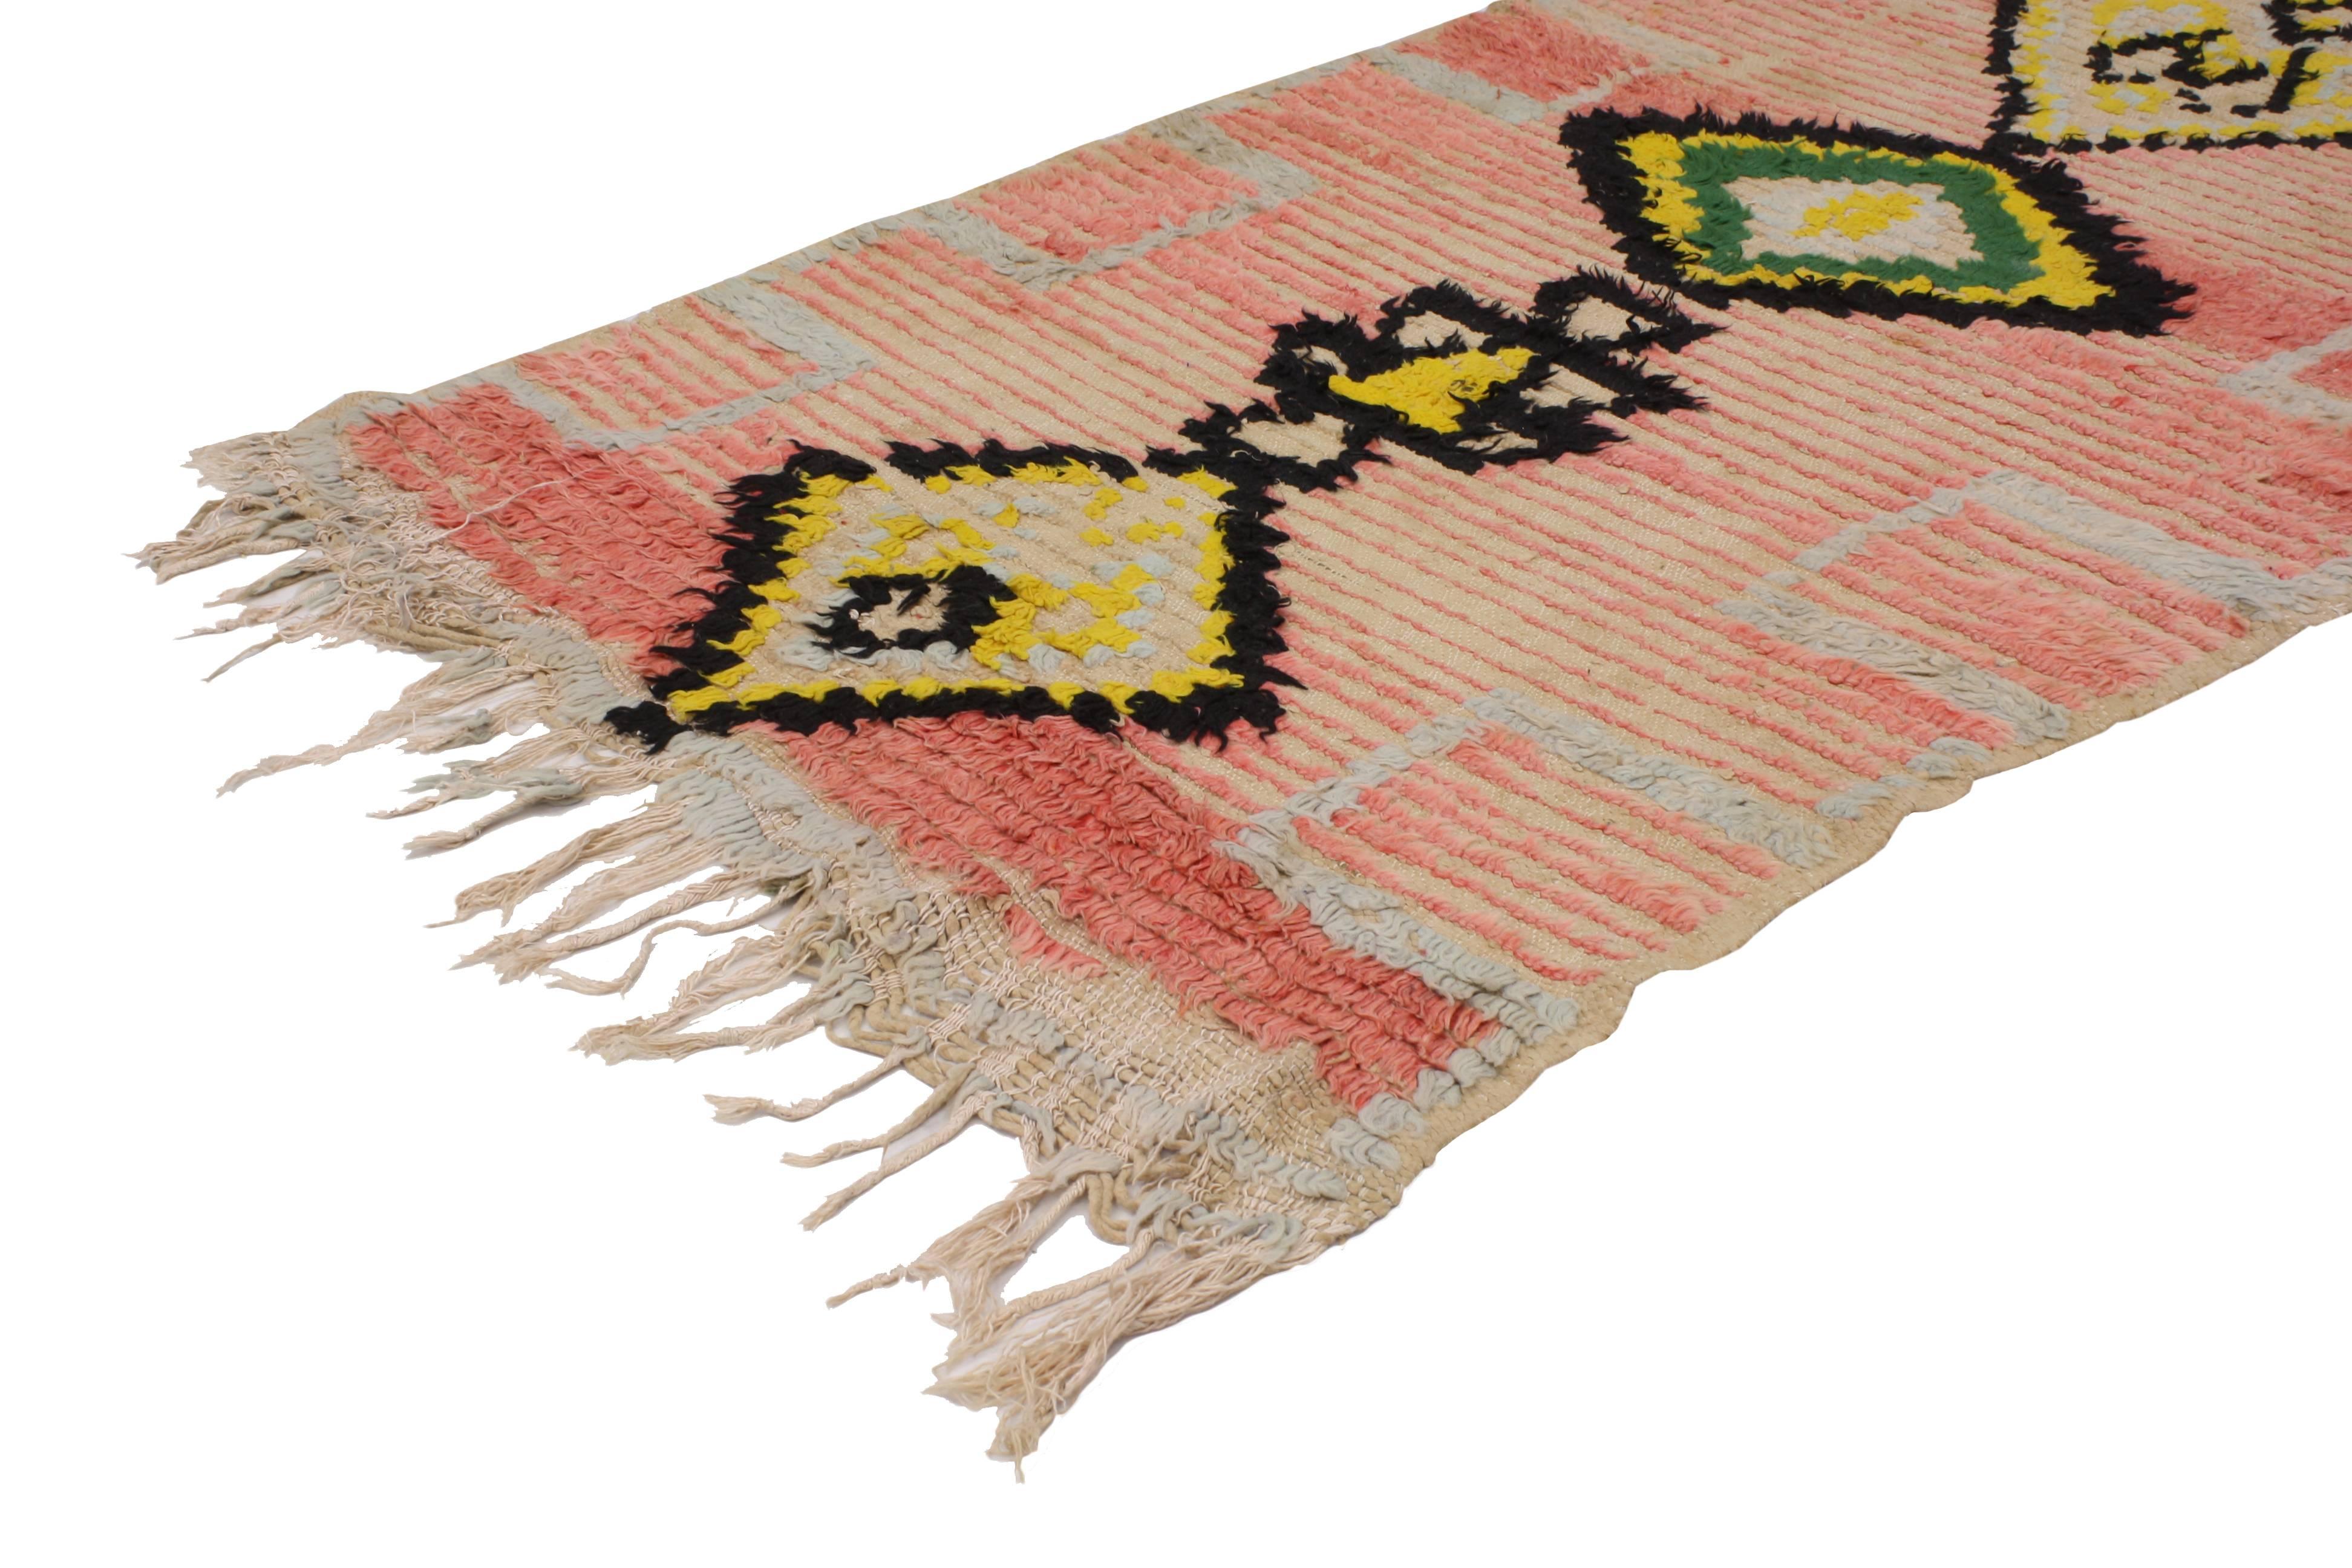 Causal and calm or subtle Bohemian, this vintage Berber Moroccan runner features a beautiful sun-faded composition. A series of ancient Berber symbols add intrigue to its modern tribal design aesthetic. Rendered in variegated shades of peach, pink,